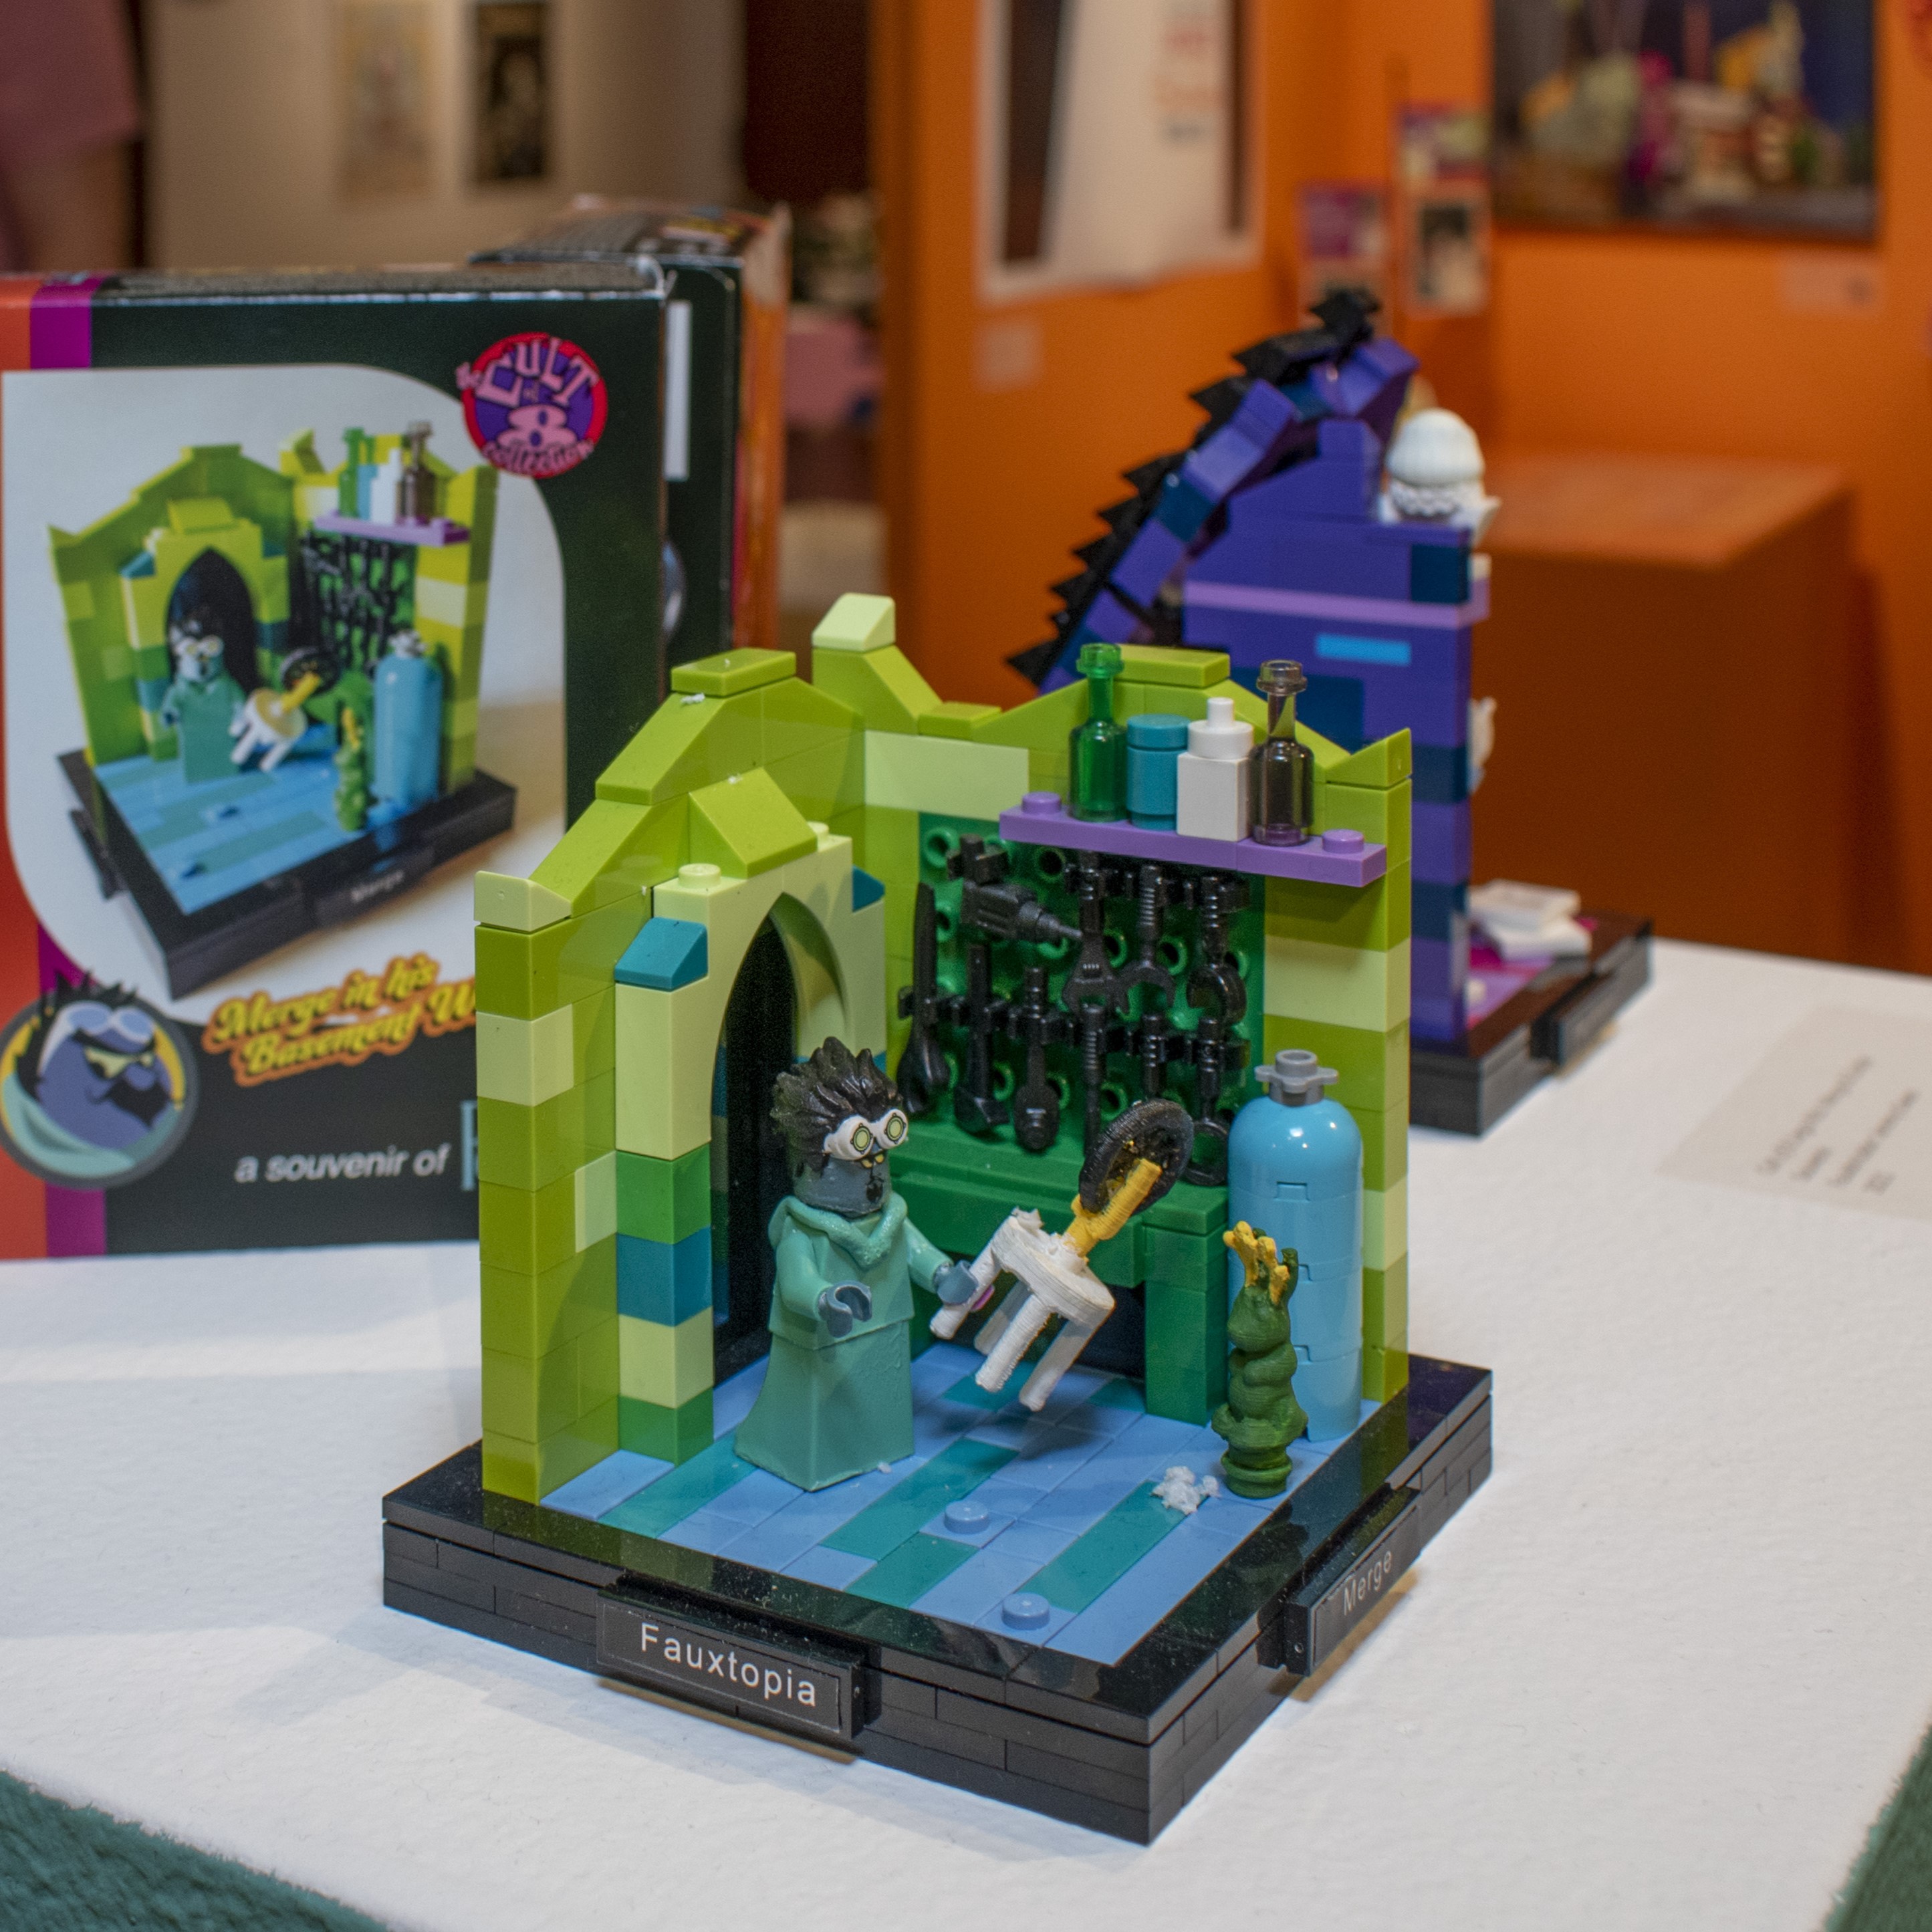 Image of Lego display of scribe on a rocking chair in a purple house